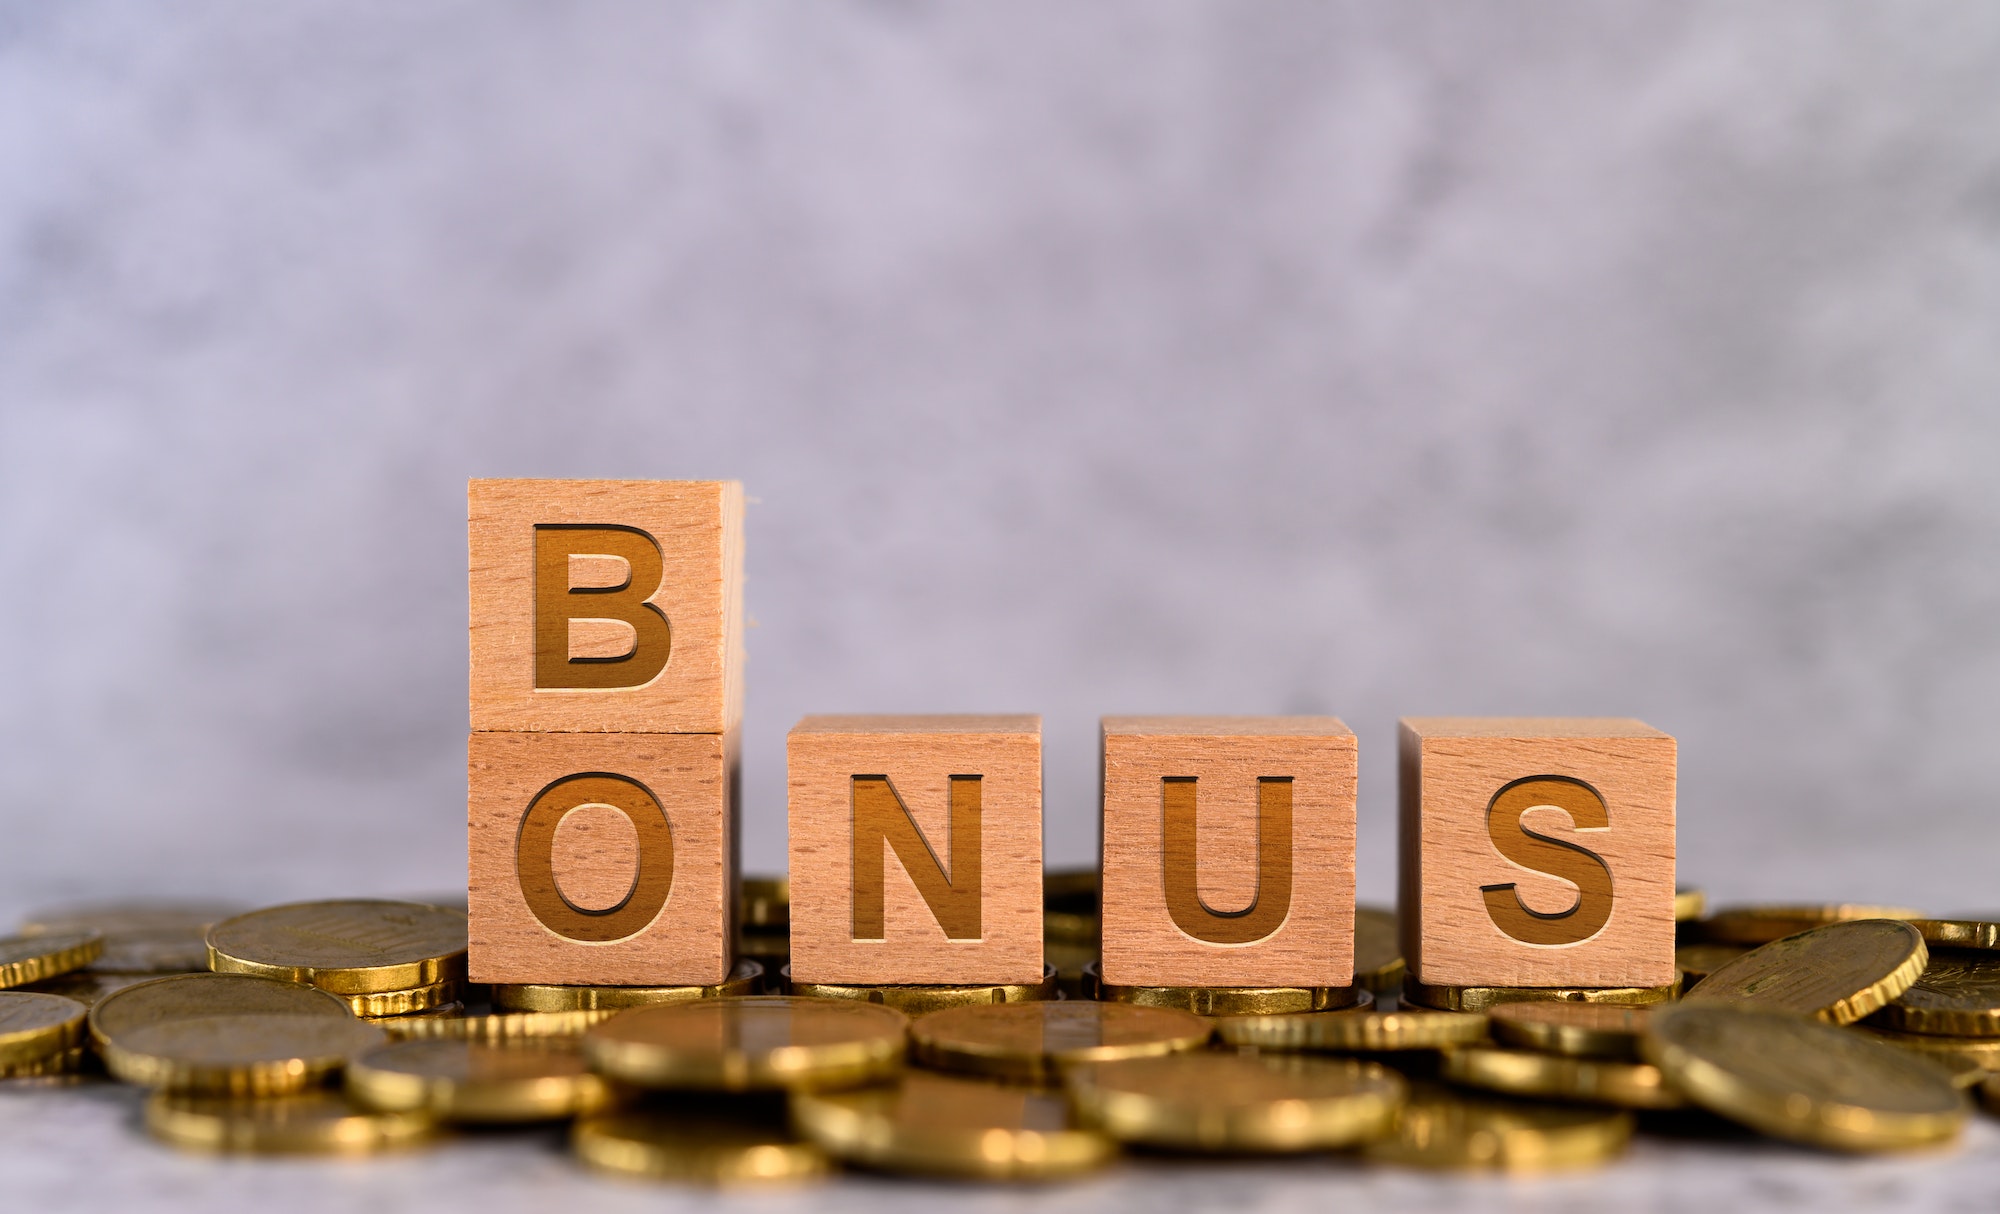 Bonus word alphabet wooden cube letters placed on a gold coin